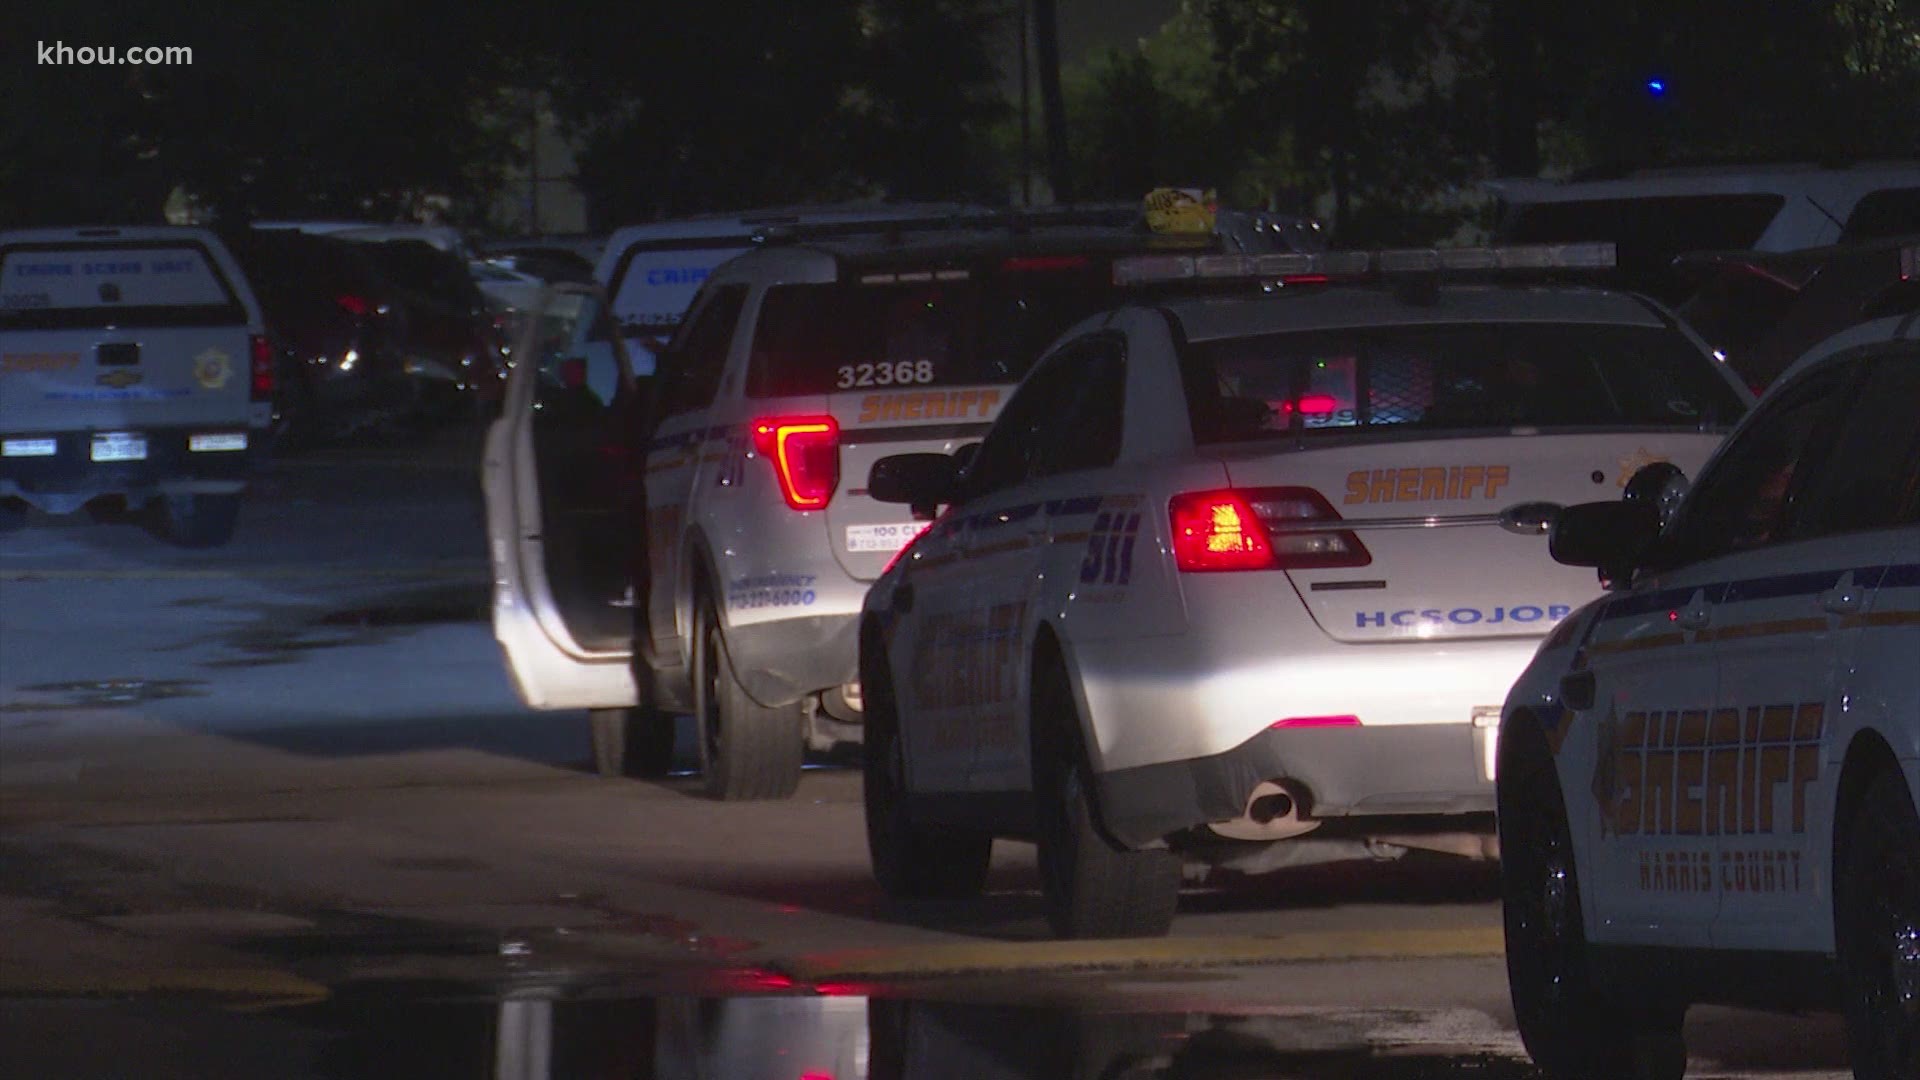 The person who shot the teen called 911. This happened on Uvalde in east Houston early Friday.